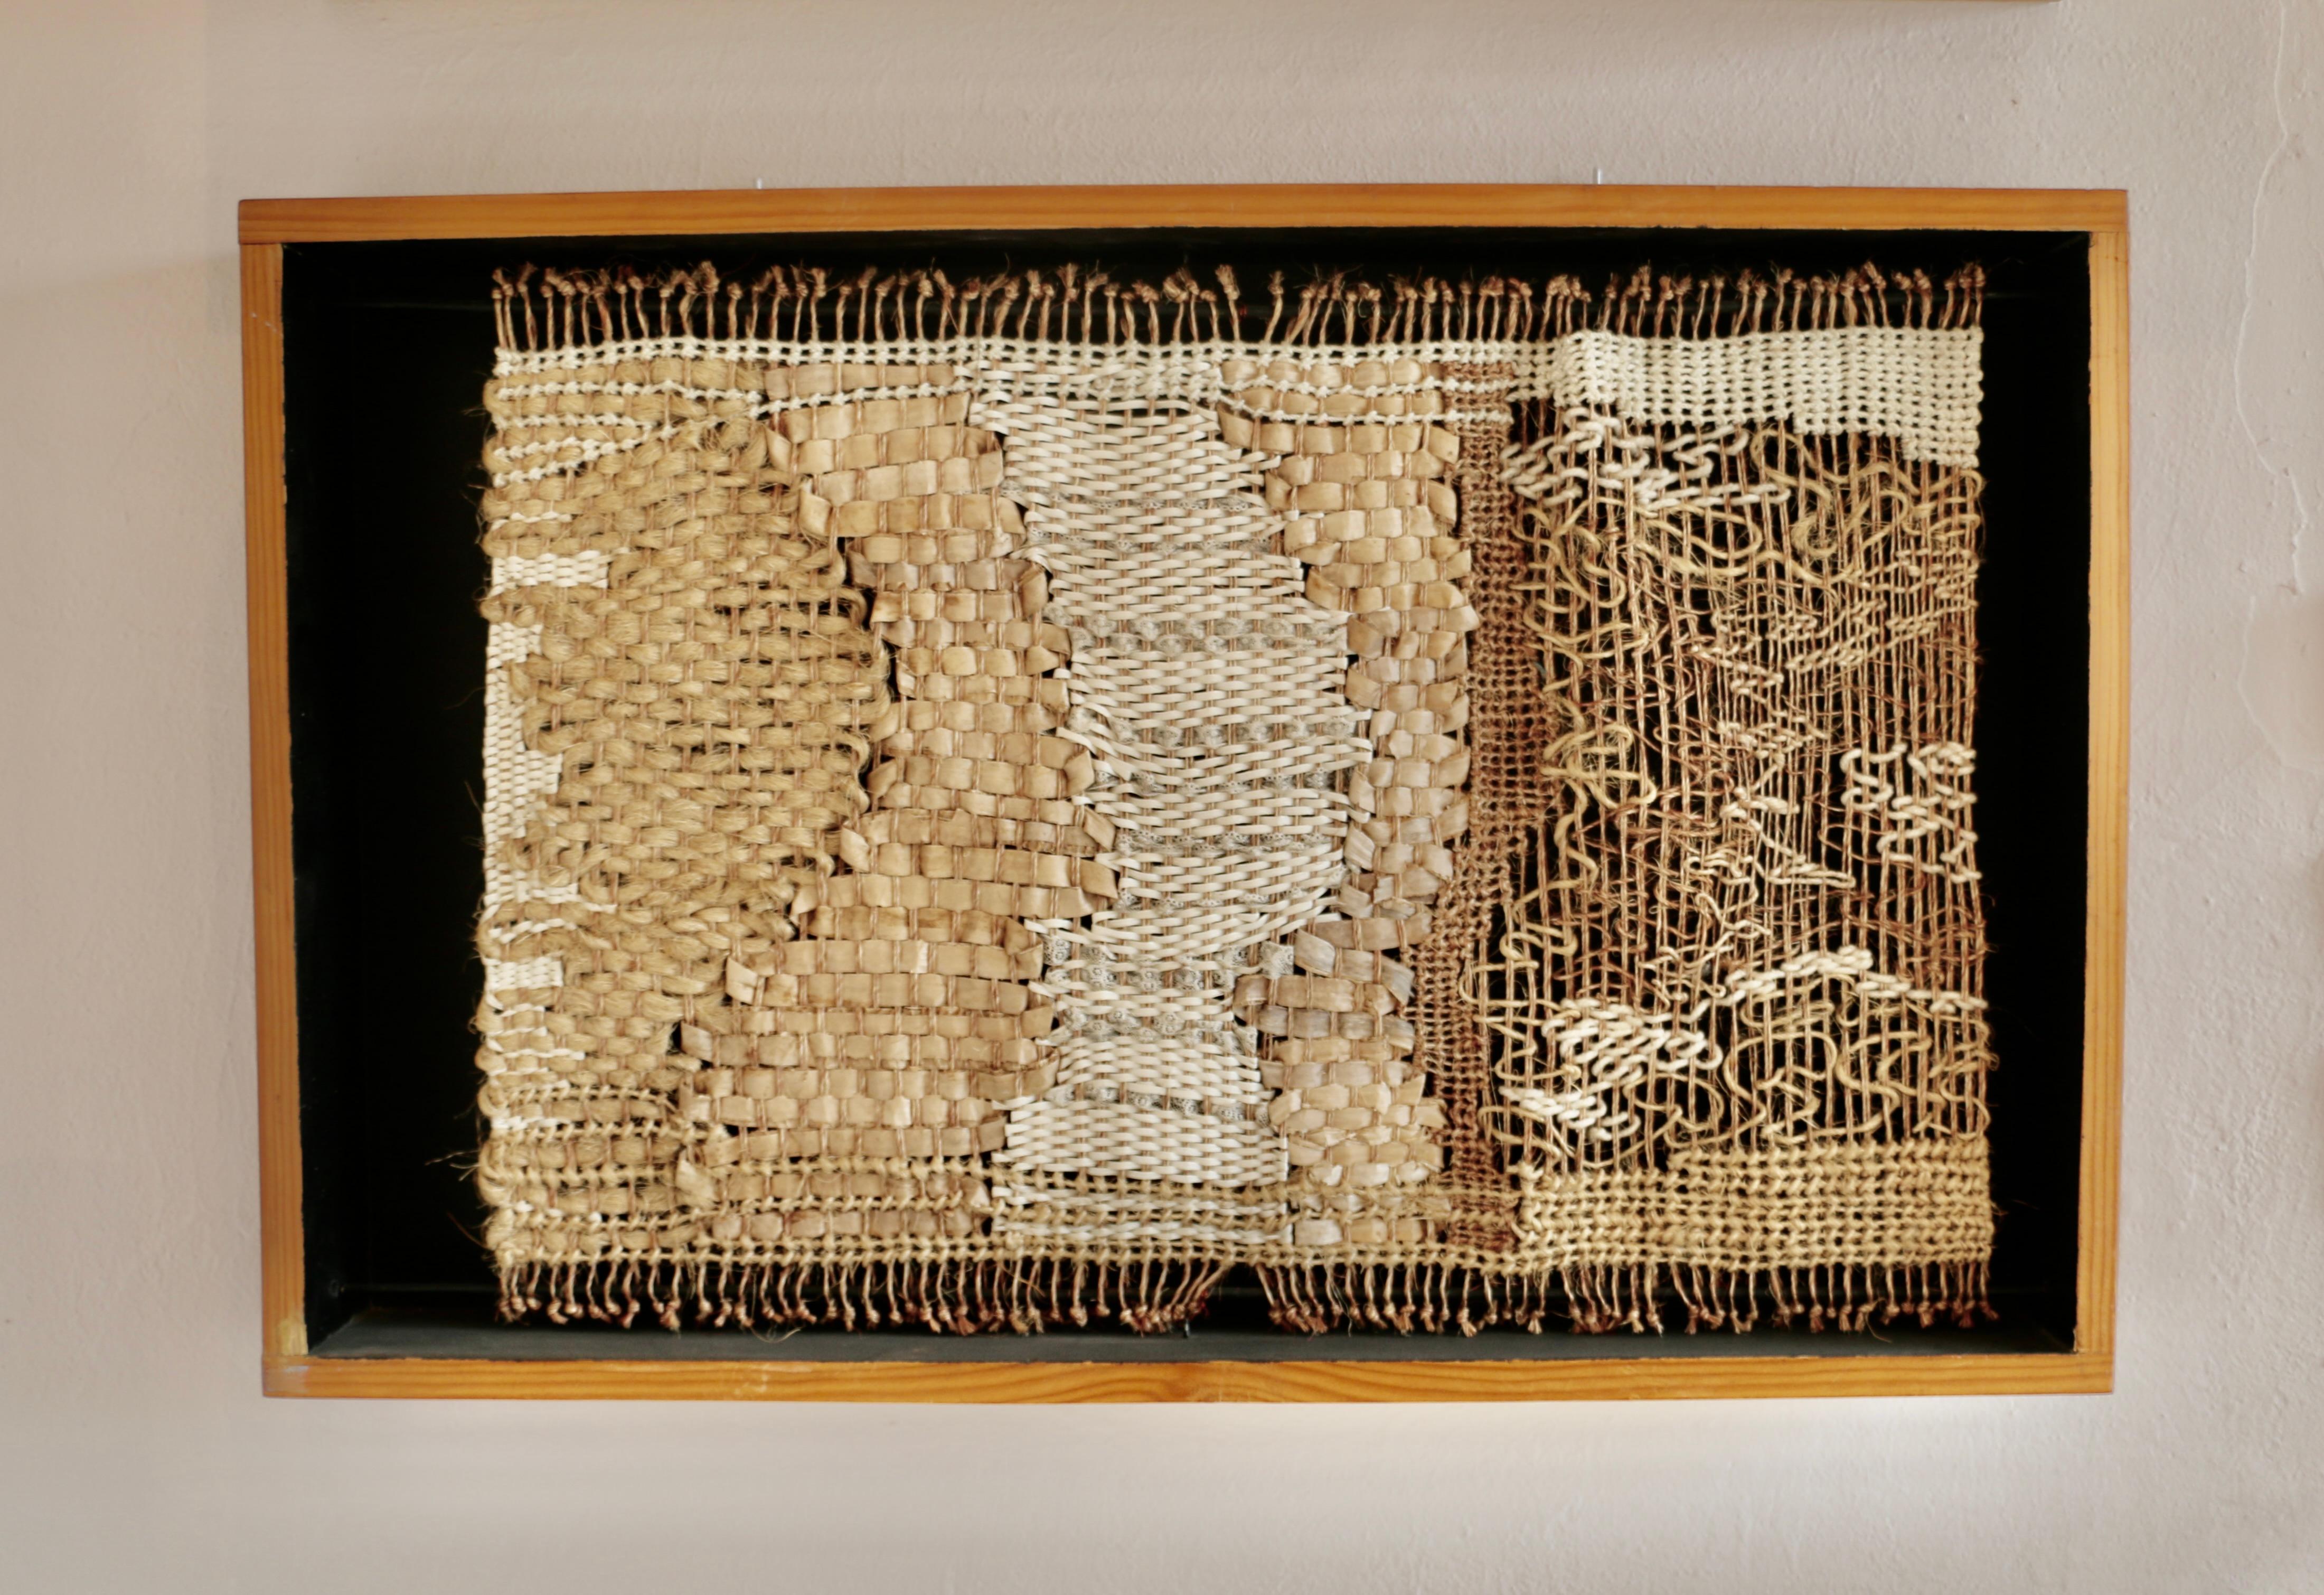 A pair of tapestries in natural materials installed in wooden boxes. Signature Laura Holguin 1990.